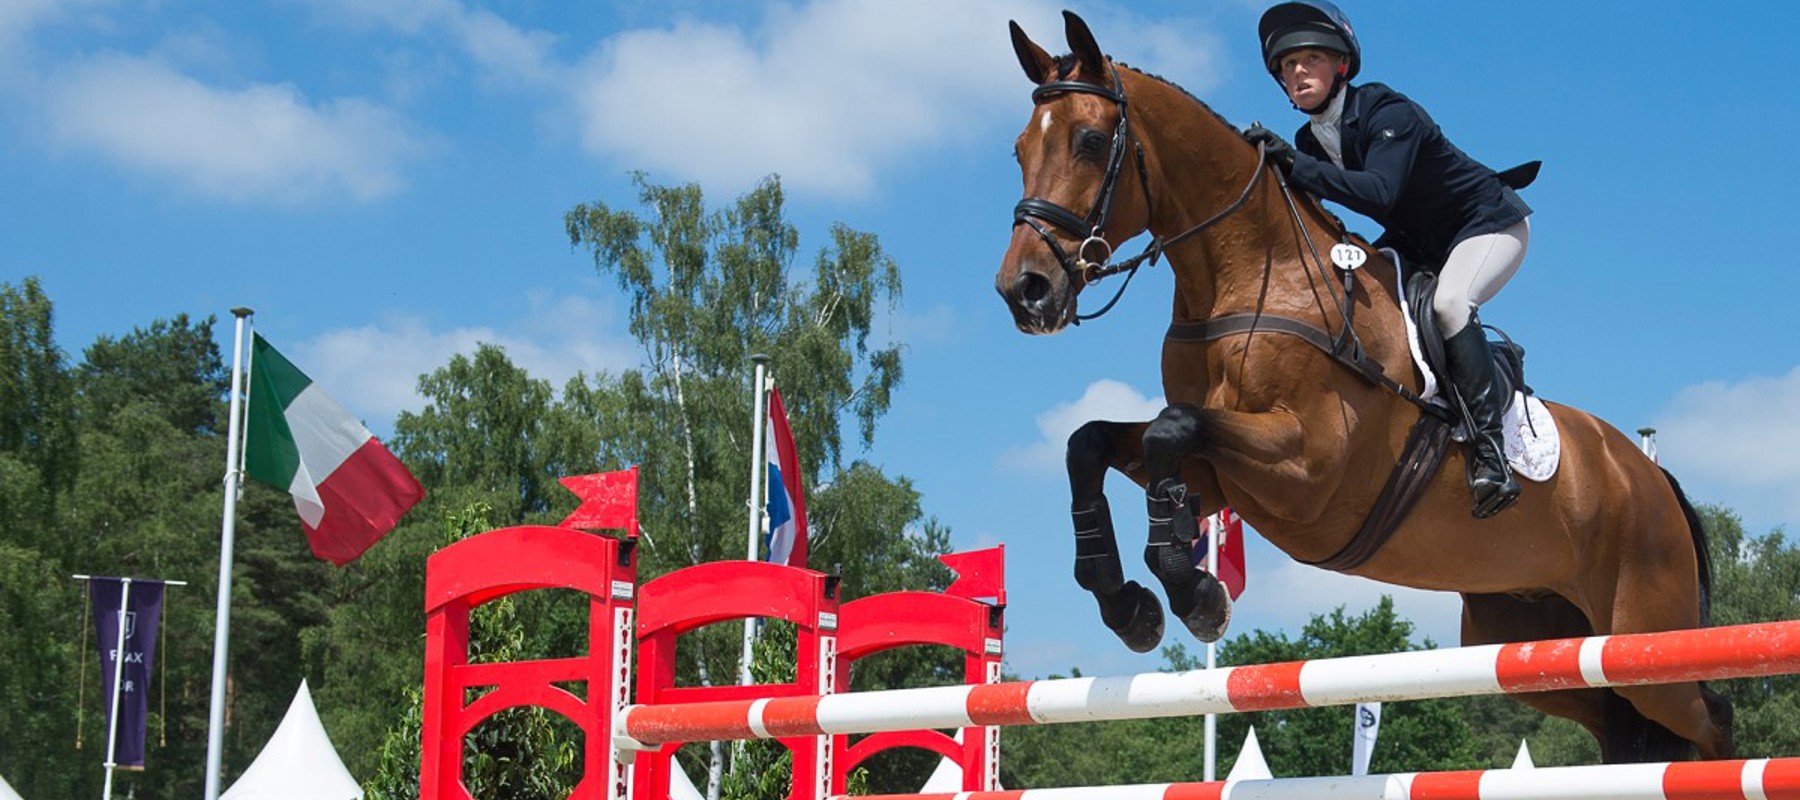 Groom With Riding Pathway (Show Jumping)